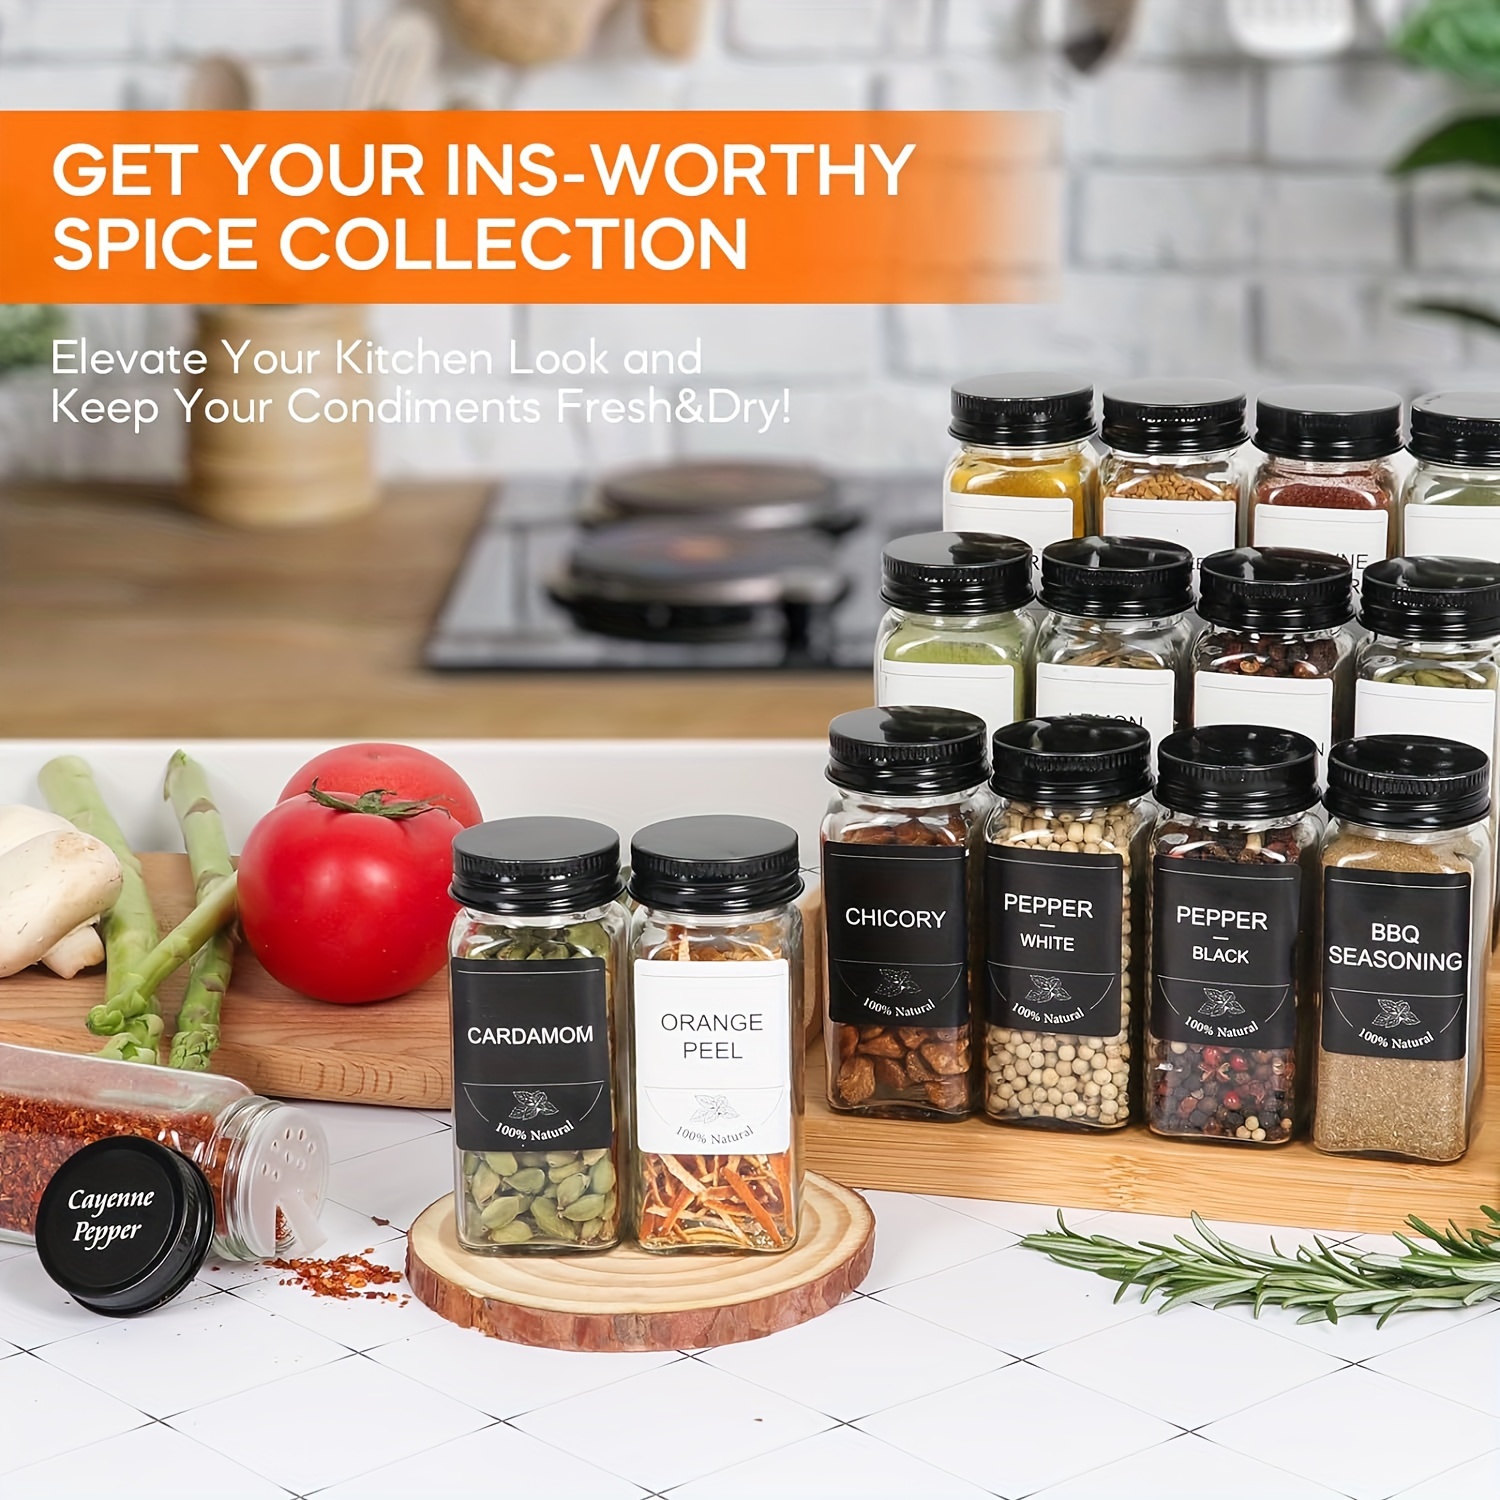 HATOKU Glass Spice Jars 48pcs Empty Square Spice Bottles, 4oz Seasoning  Containers with 400 Labels, Spice Containers with Shaker Lids and Silicone  Collapsible Funnel, Brush - Yahoo Shopping